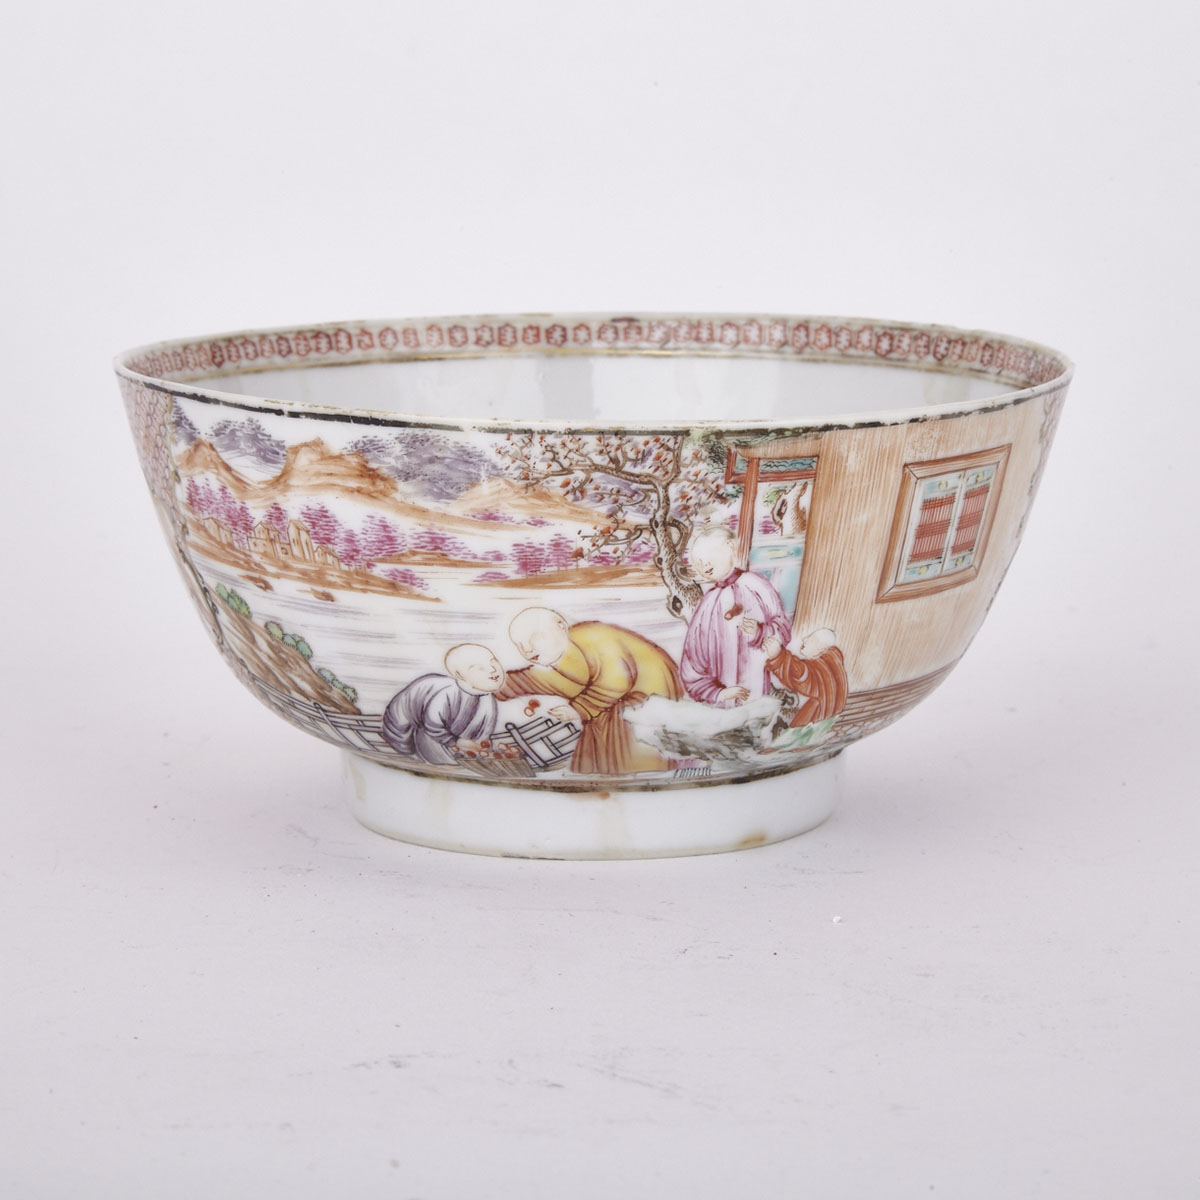 Export Famille Rose Bowl, 18th Century